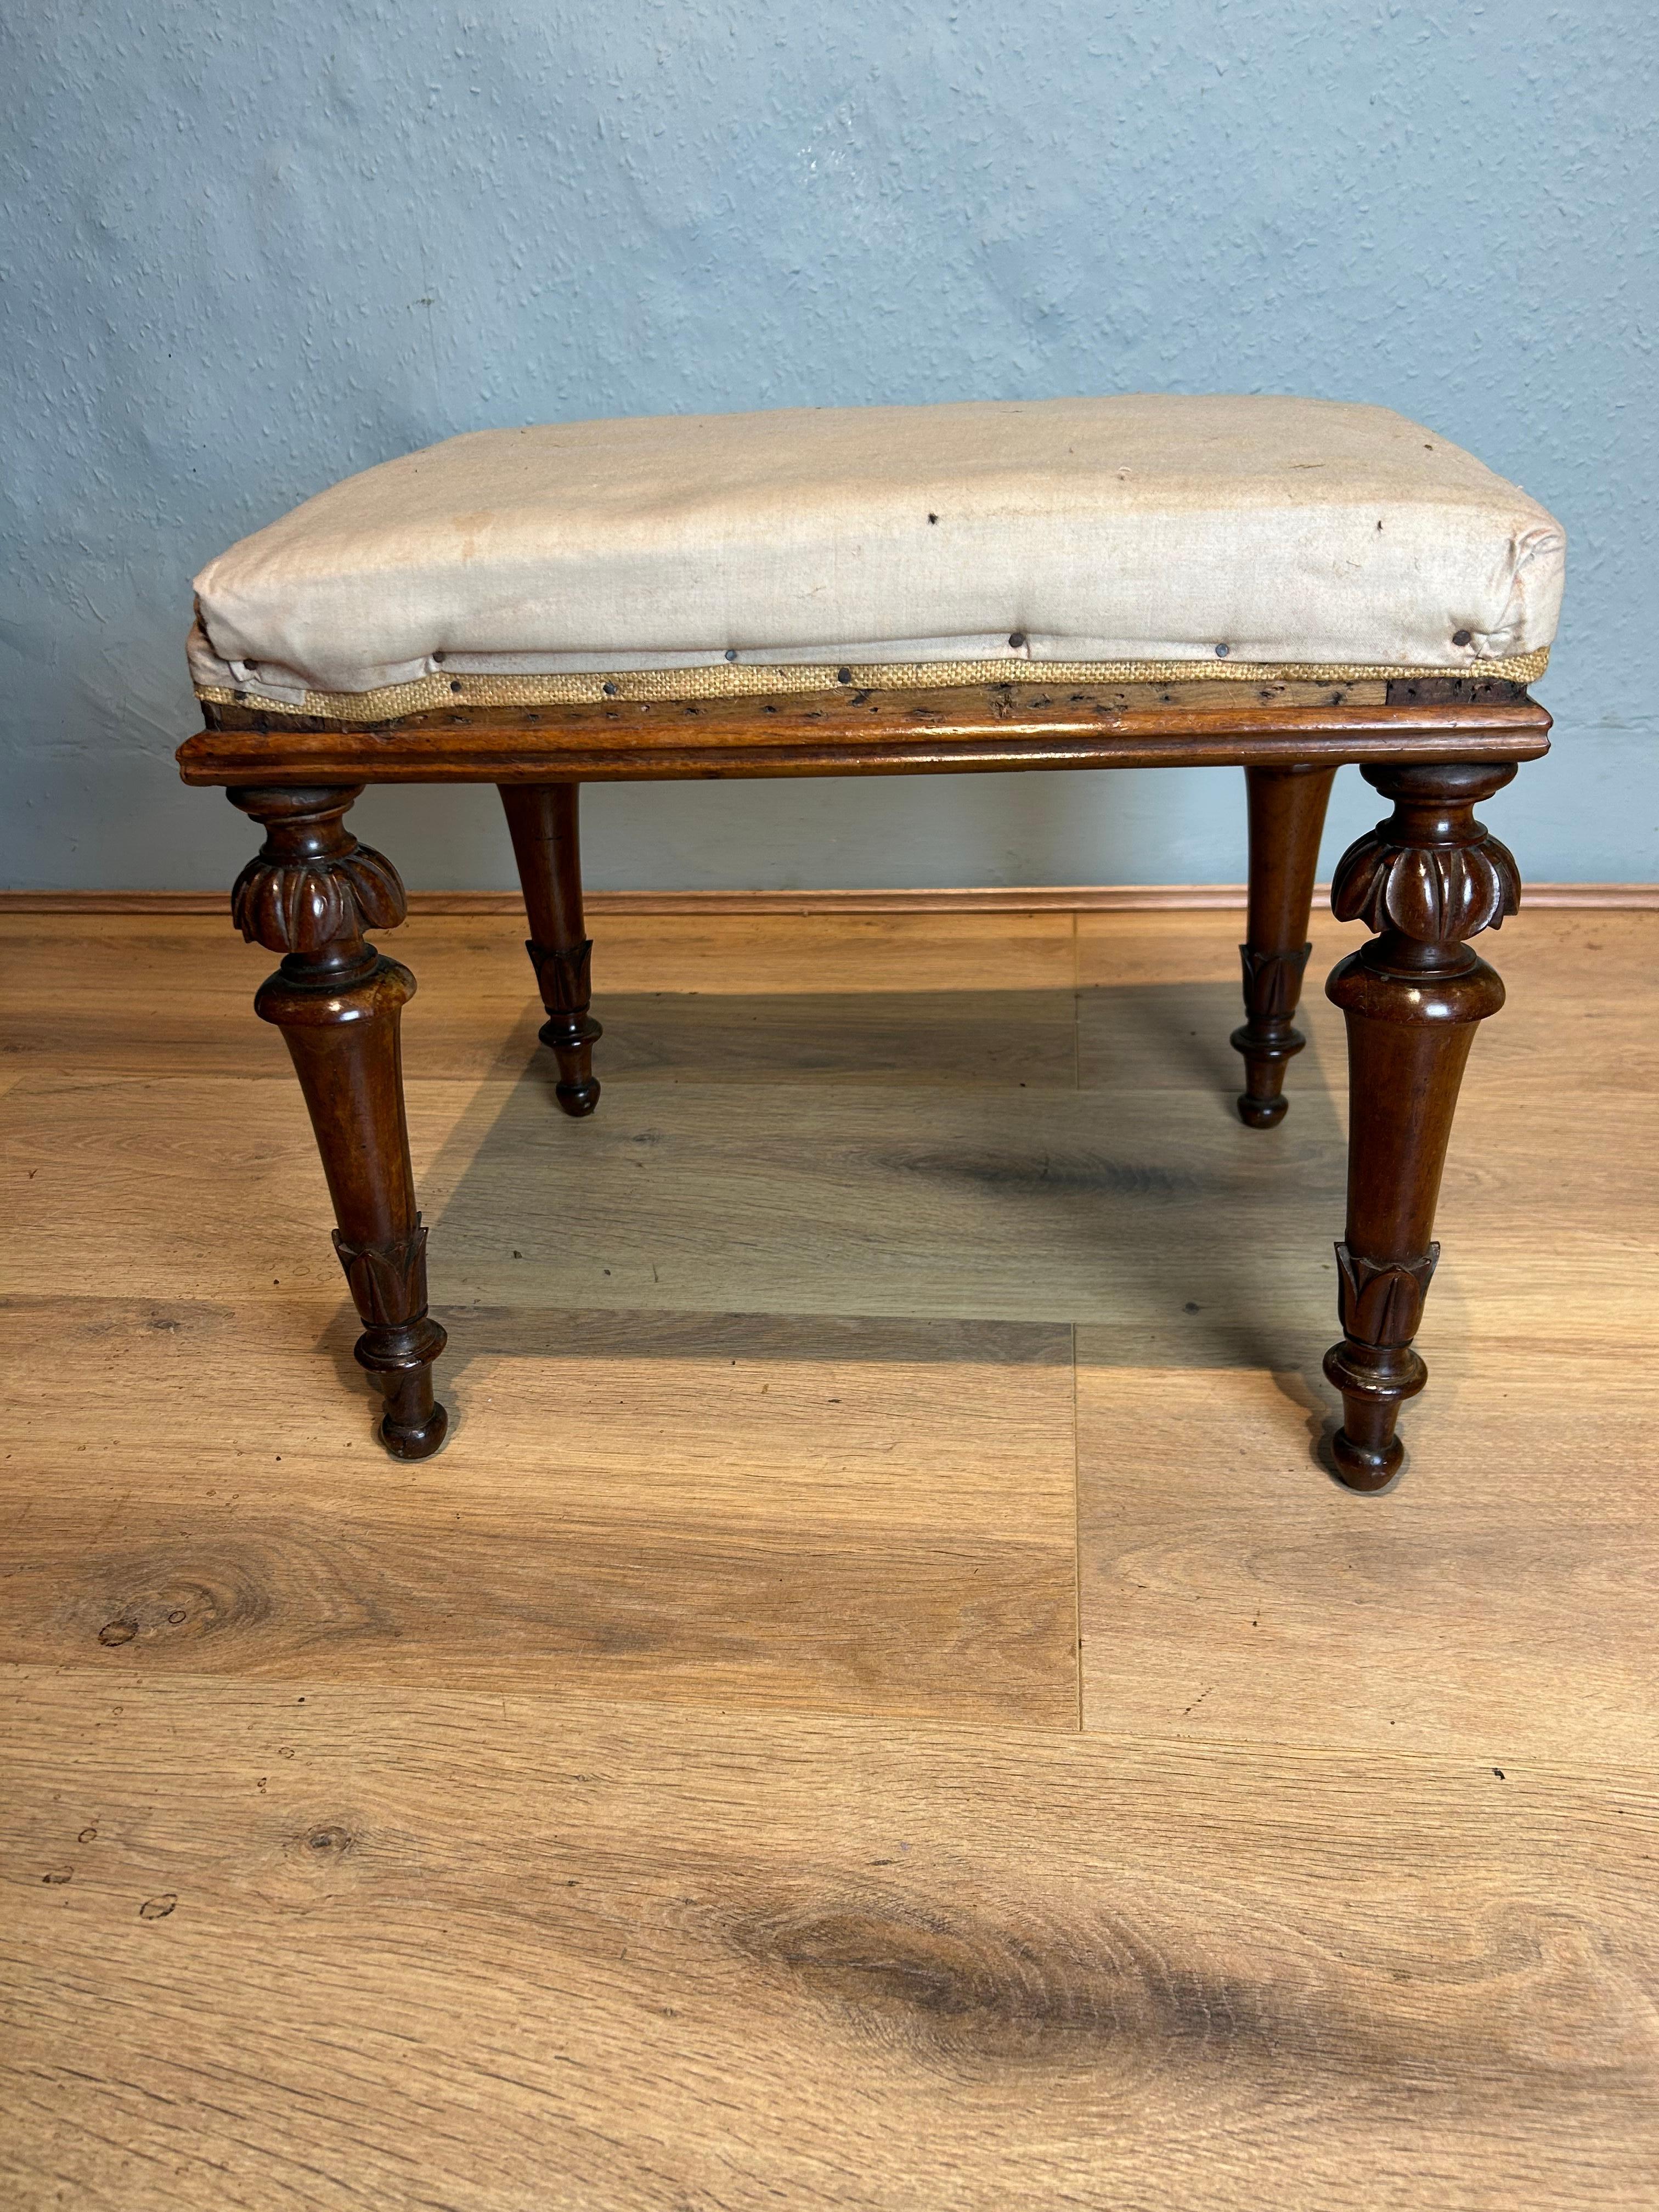 Antique William 4th stool circa 1835 retaining its original upholstery in the calico , the rails lipped with a ogee moulding resting on turned carved acanthus legs.